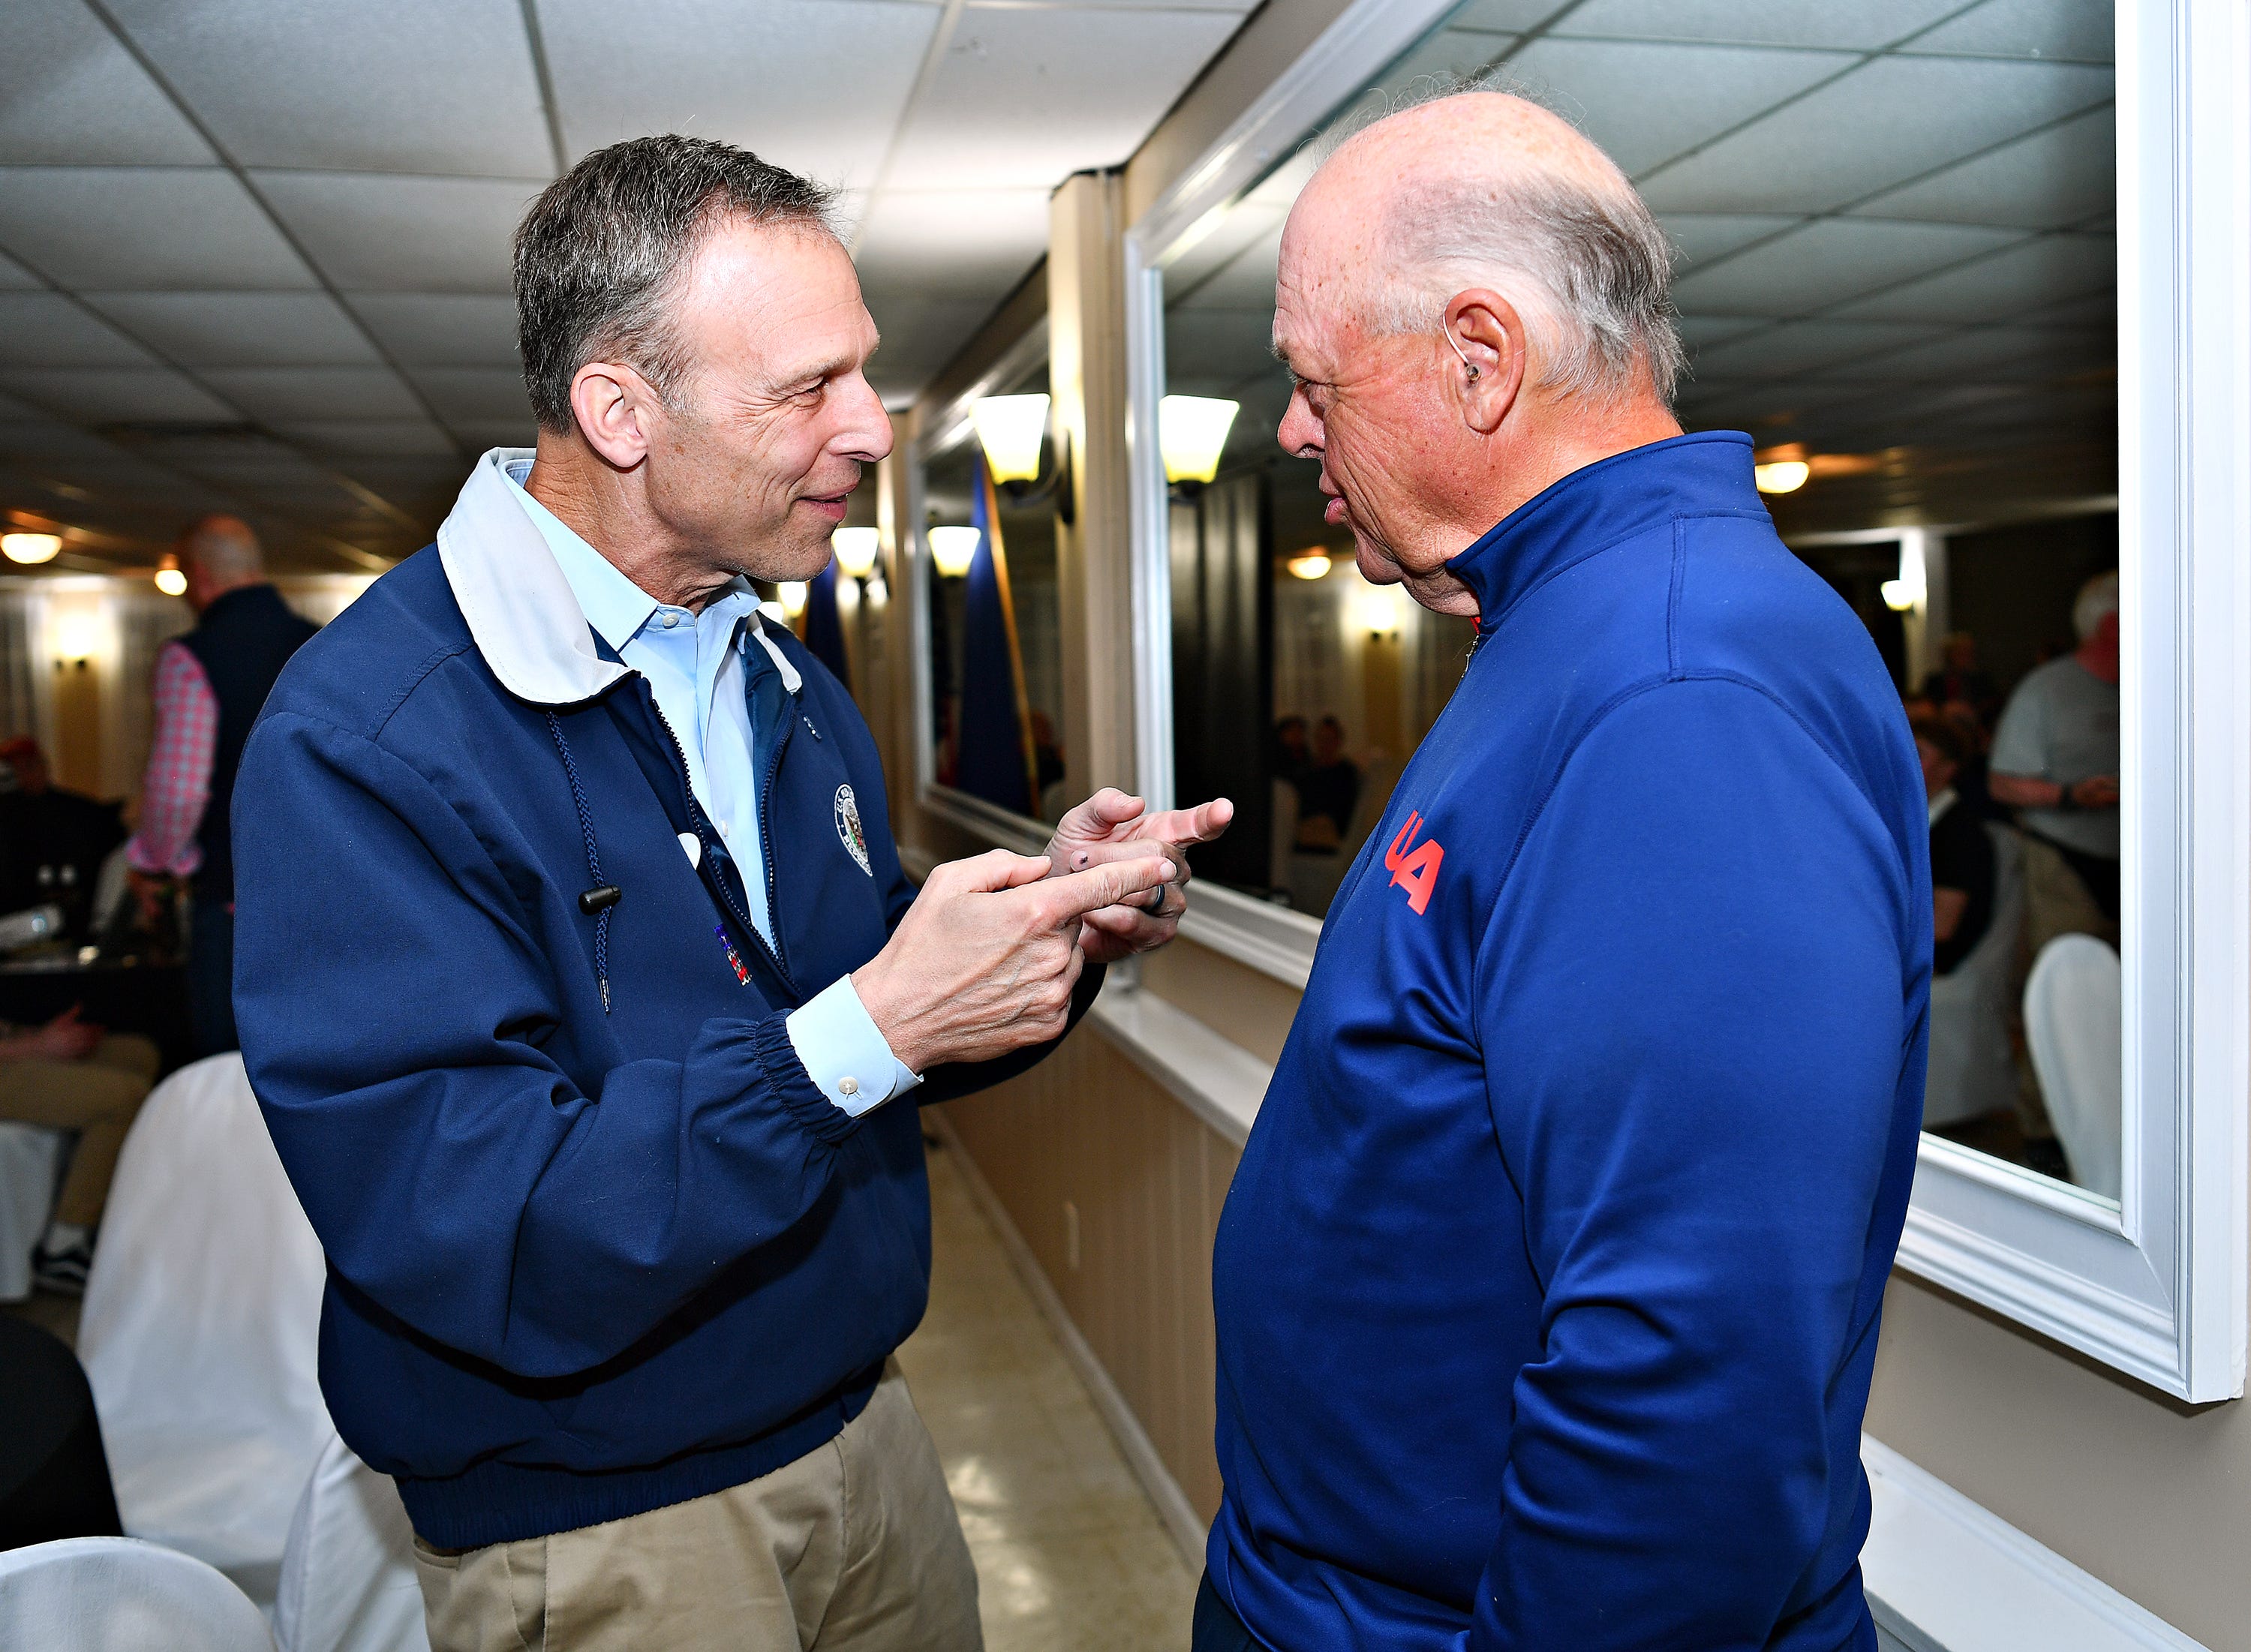 U.S. Congressman Scott Perry, left, during the York County Republicans watch party at Wisehaven Event Center in Windsor Township, Tuesday, Nov. 8, 2022. Dawn J. Sagert/The York Dispatch